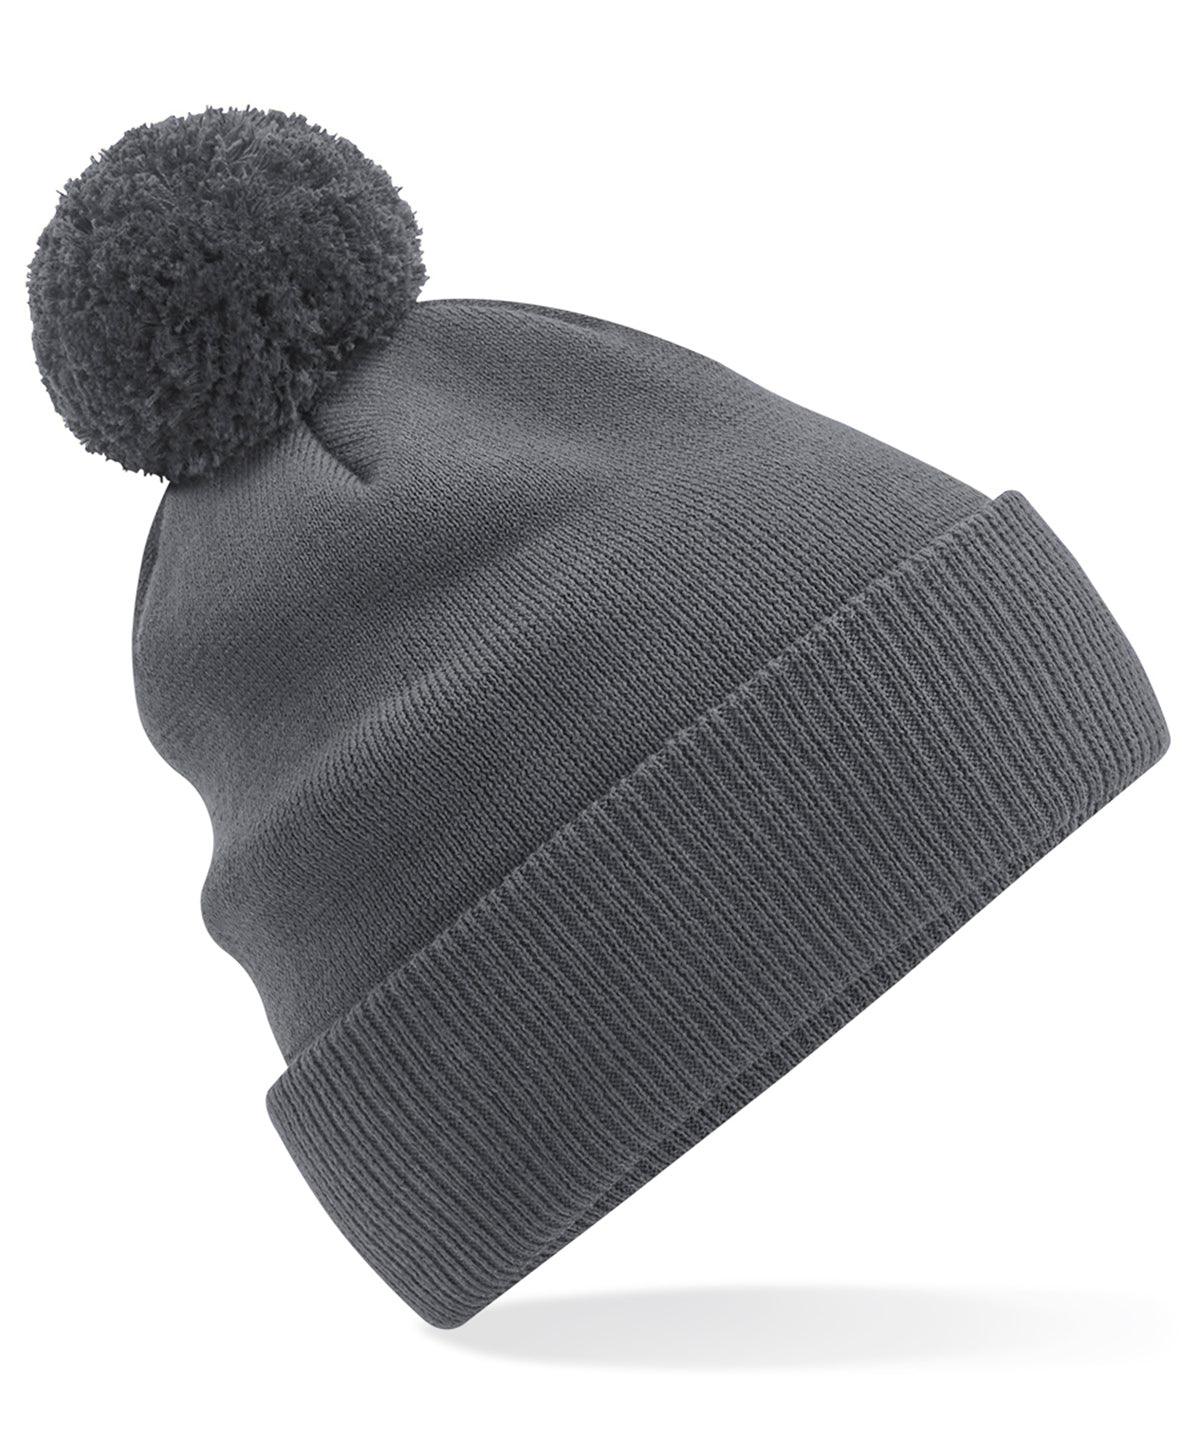 Graphite Grey - Organic cotton Snowstar® beanie Hats Beechfield Must Haves, New For 2021, New In Autumn Winter, New In Mid Year, Organic & Conscious, Seasonal Styling, Winter Essentials Schoolwear Centres